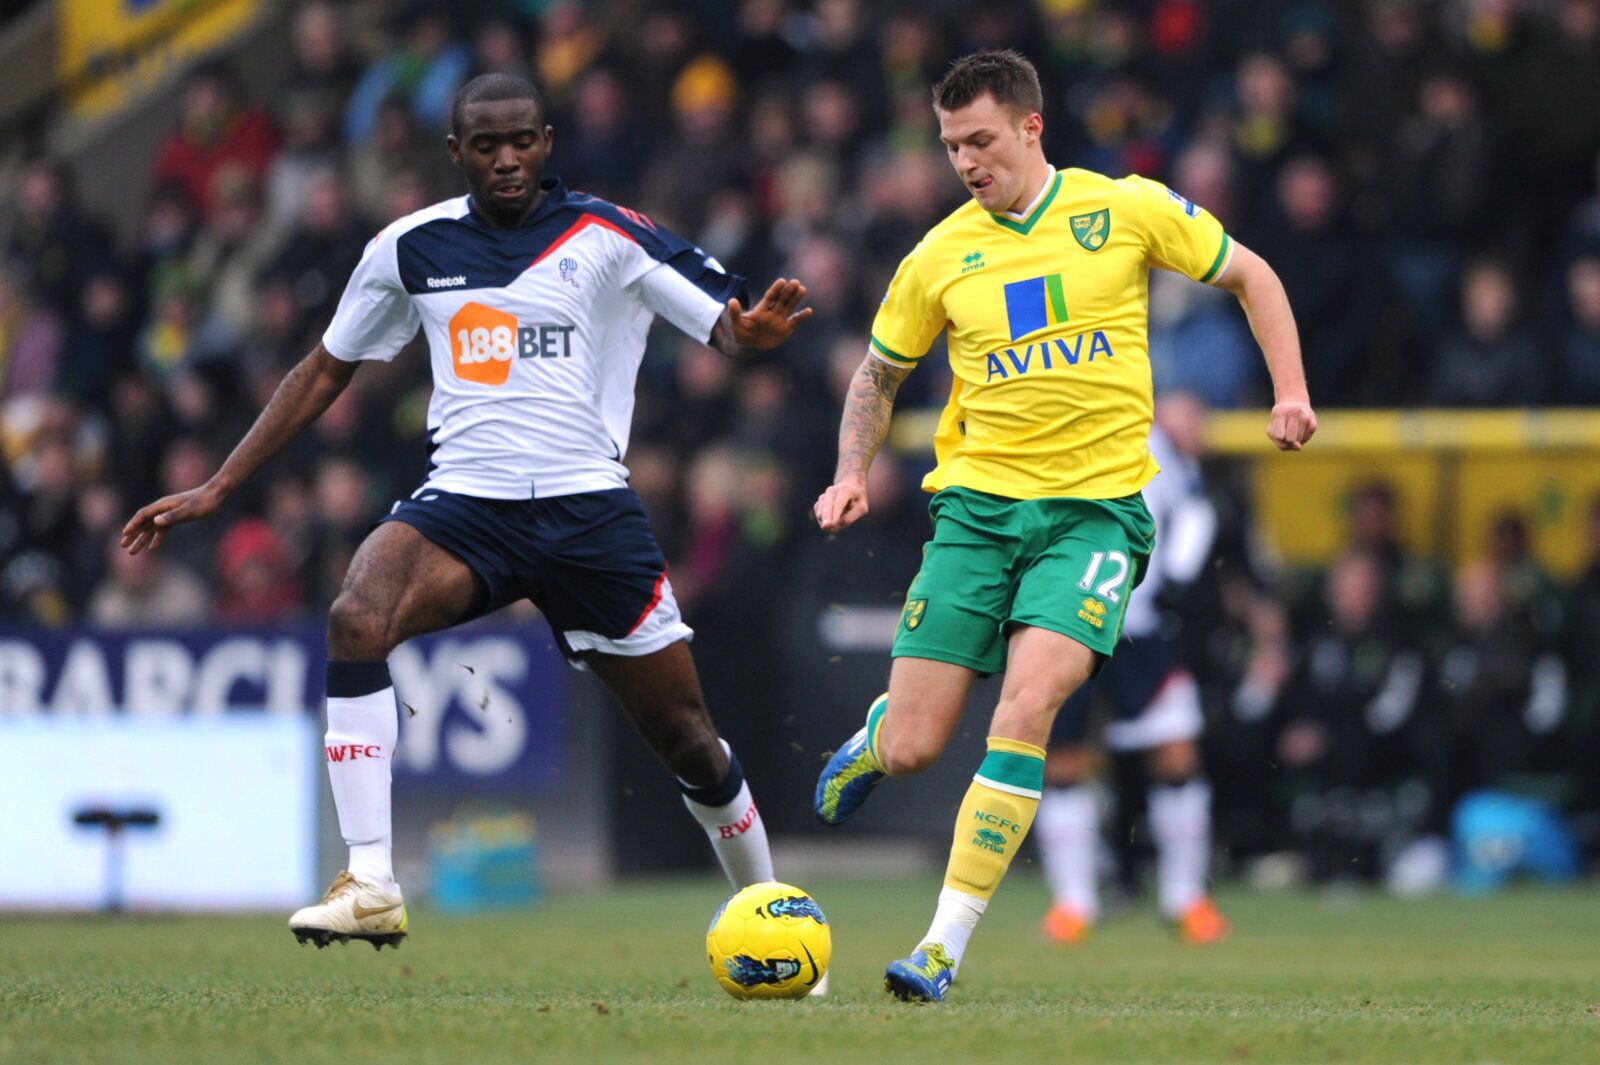 Football - Norwich City v Bolton Wanderers Barclays Premier League - Carrow Road - 11/12 - 4/2/12 
Anthony Pilkington - Norwich City in action against Fabrice Muamba - Bolton Wanderers (L) 
Mandatory Credit: Action Images / Henry Browne 
EDITORIAL USE ONLY. No use with unauthorized audio, video, data, fixture lists, club/league logos or live services. Online in-match use limited to 45 images, no video emulation. No use in betting, games or single club/league/player publications.  Please contact 